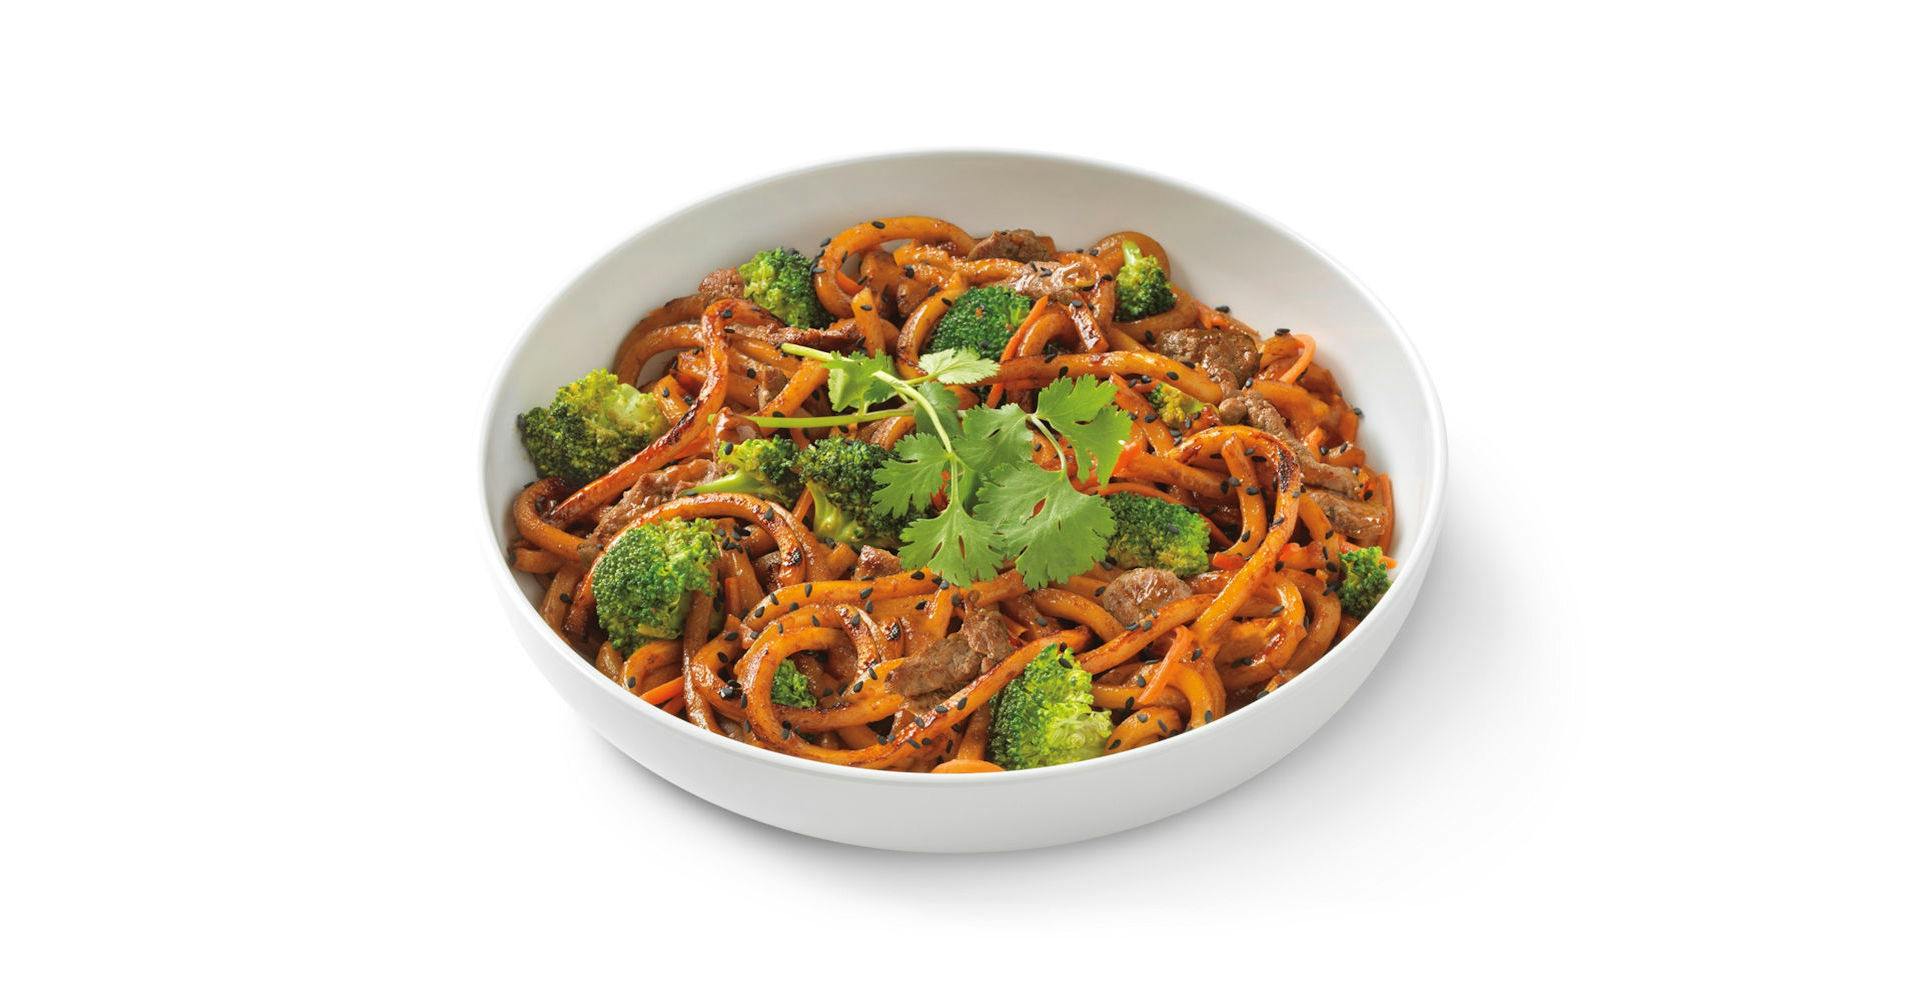 Japanese Pan Noodles with Marinated Steak from Noodles & Company - Madison State Street in Madison, WI